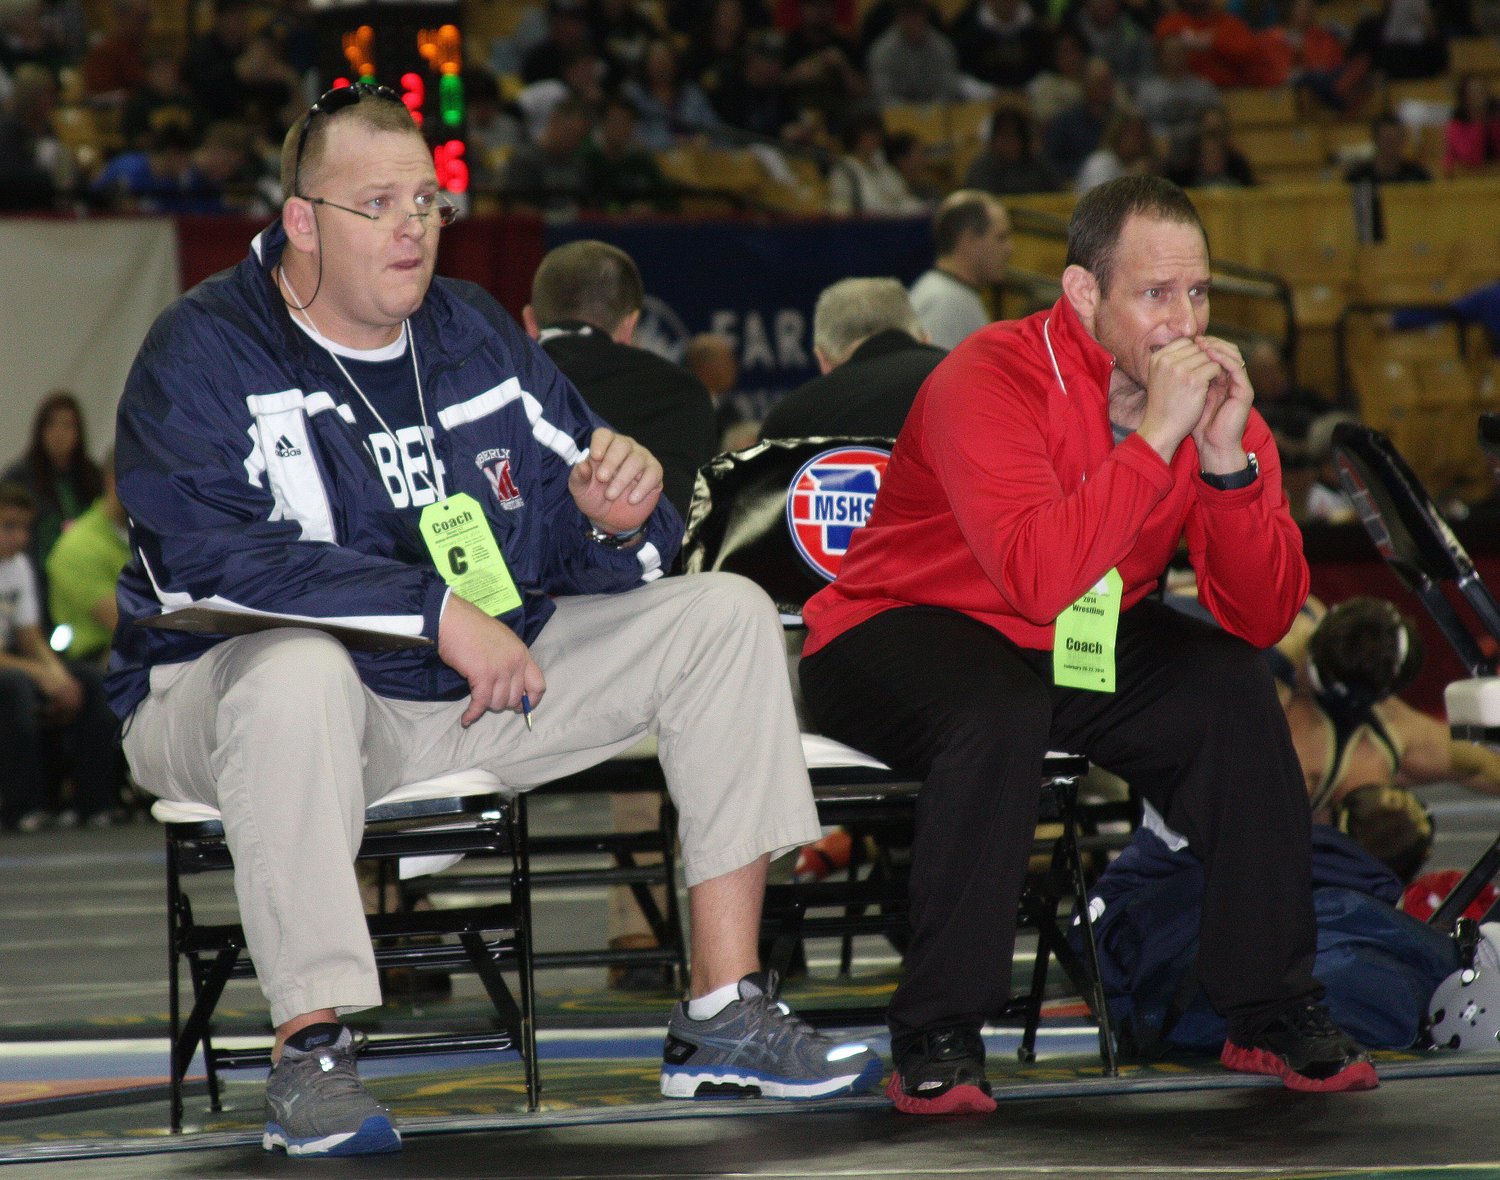 While serving as  Moberly Spartans head wrestling coach, Sam Richardson is shown sitting alongside his then-assistant Doug Heimann as they coach a Moberly wrestler at the 2014 MSHSAA Class 2 Wrestling Championships held in Columbia. Richardson spent 11 years as the program's head coach and he retired at the end of the 2015-16 campaign as the winningest coach in Spartans wrestling history having an overall coaching record of 217-47. Sam, 53, passed away July 31, 2021.